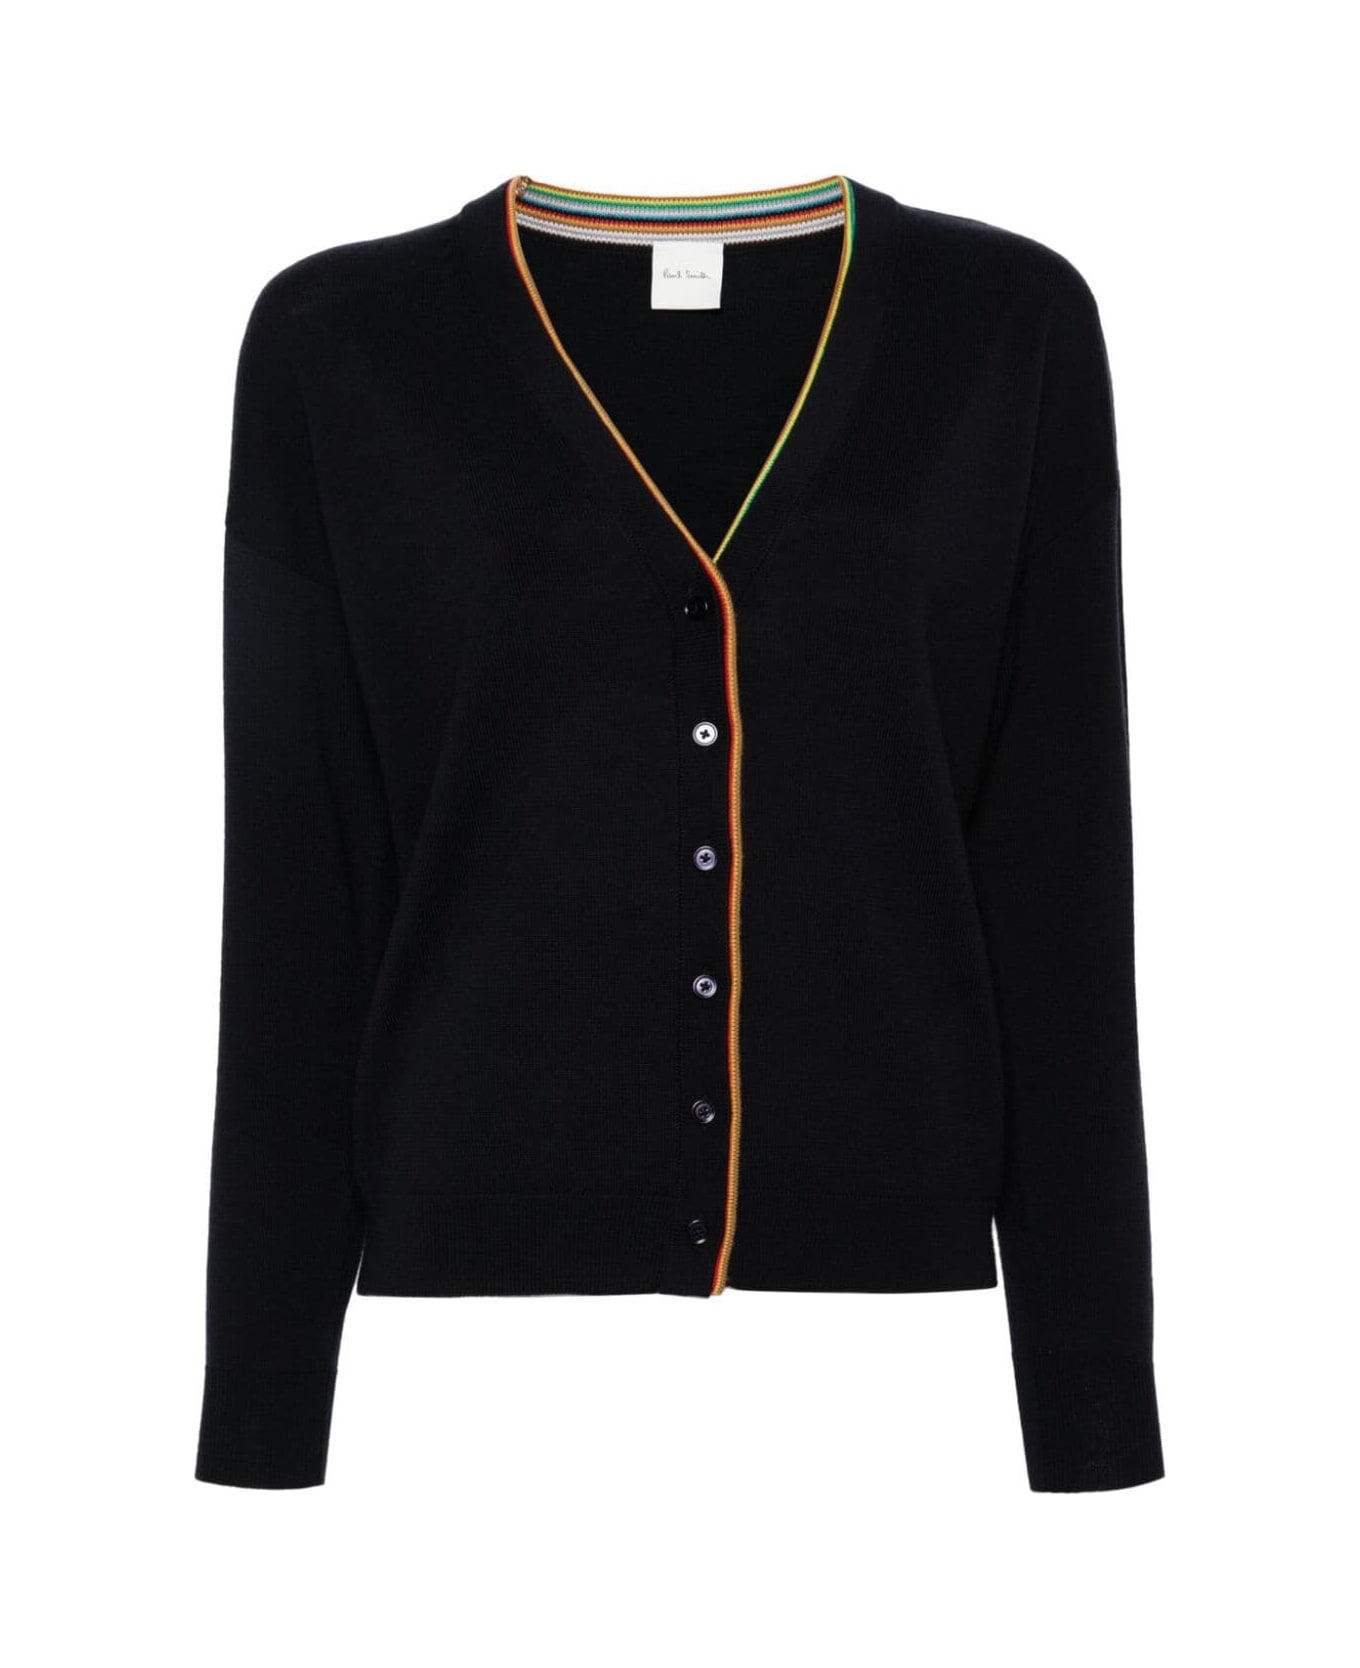 Paul Smith Knitted Buttoned Cardigan - A Multi